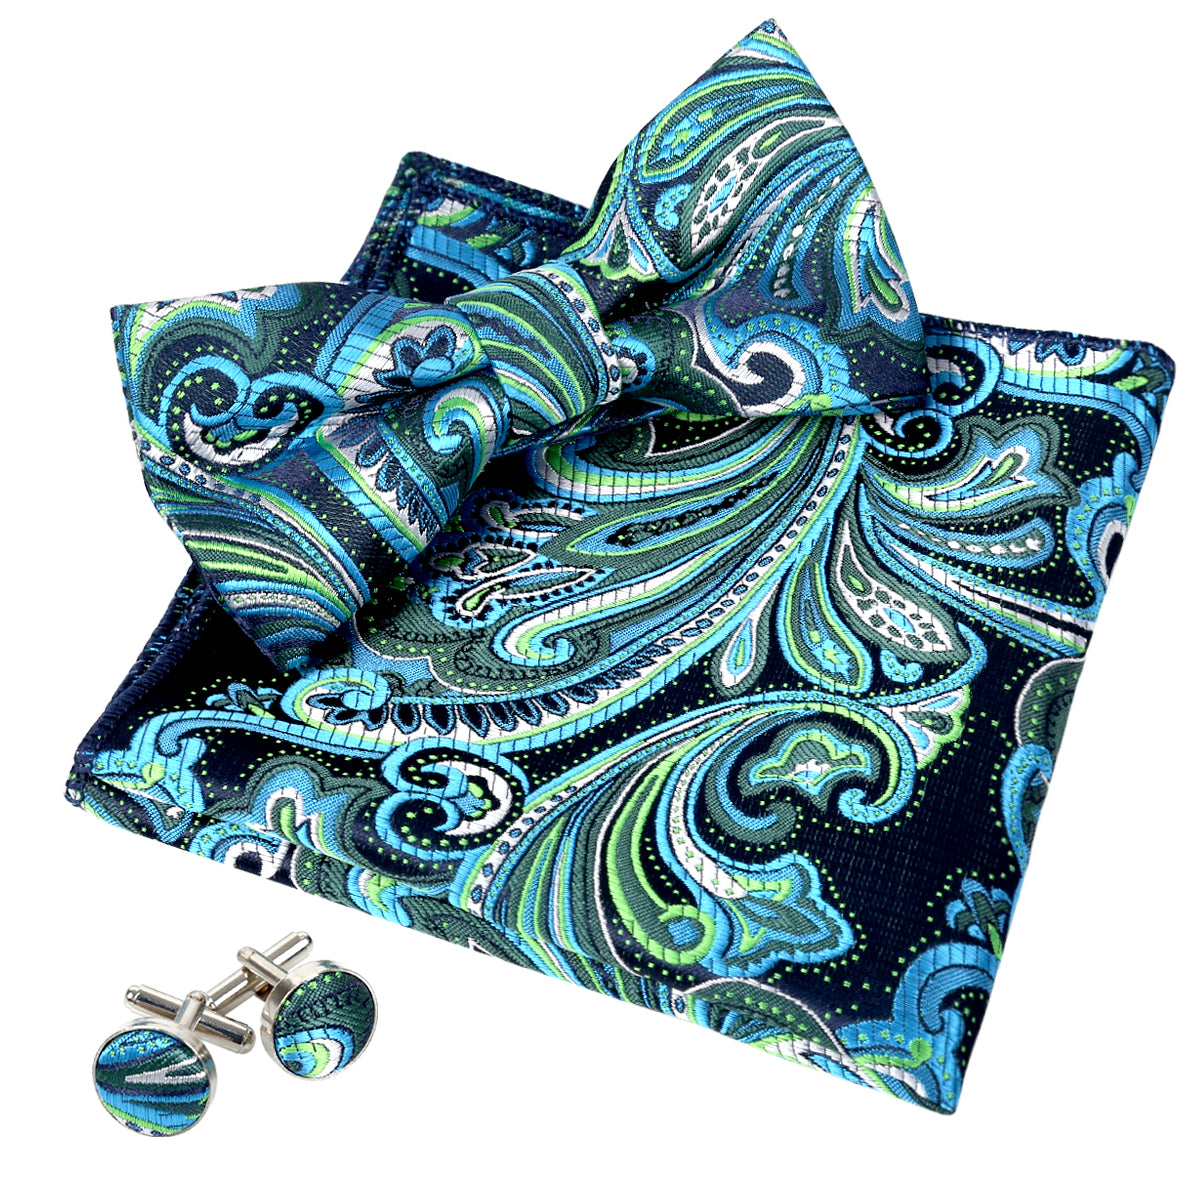 Men's Multi-color Floral Pre-tied Bow Tie, Pocket Square and Cufflinks Set, 011